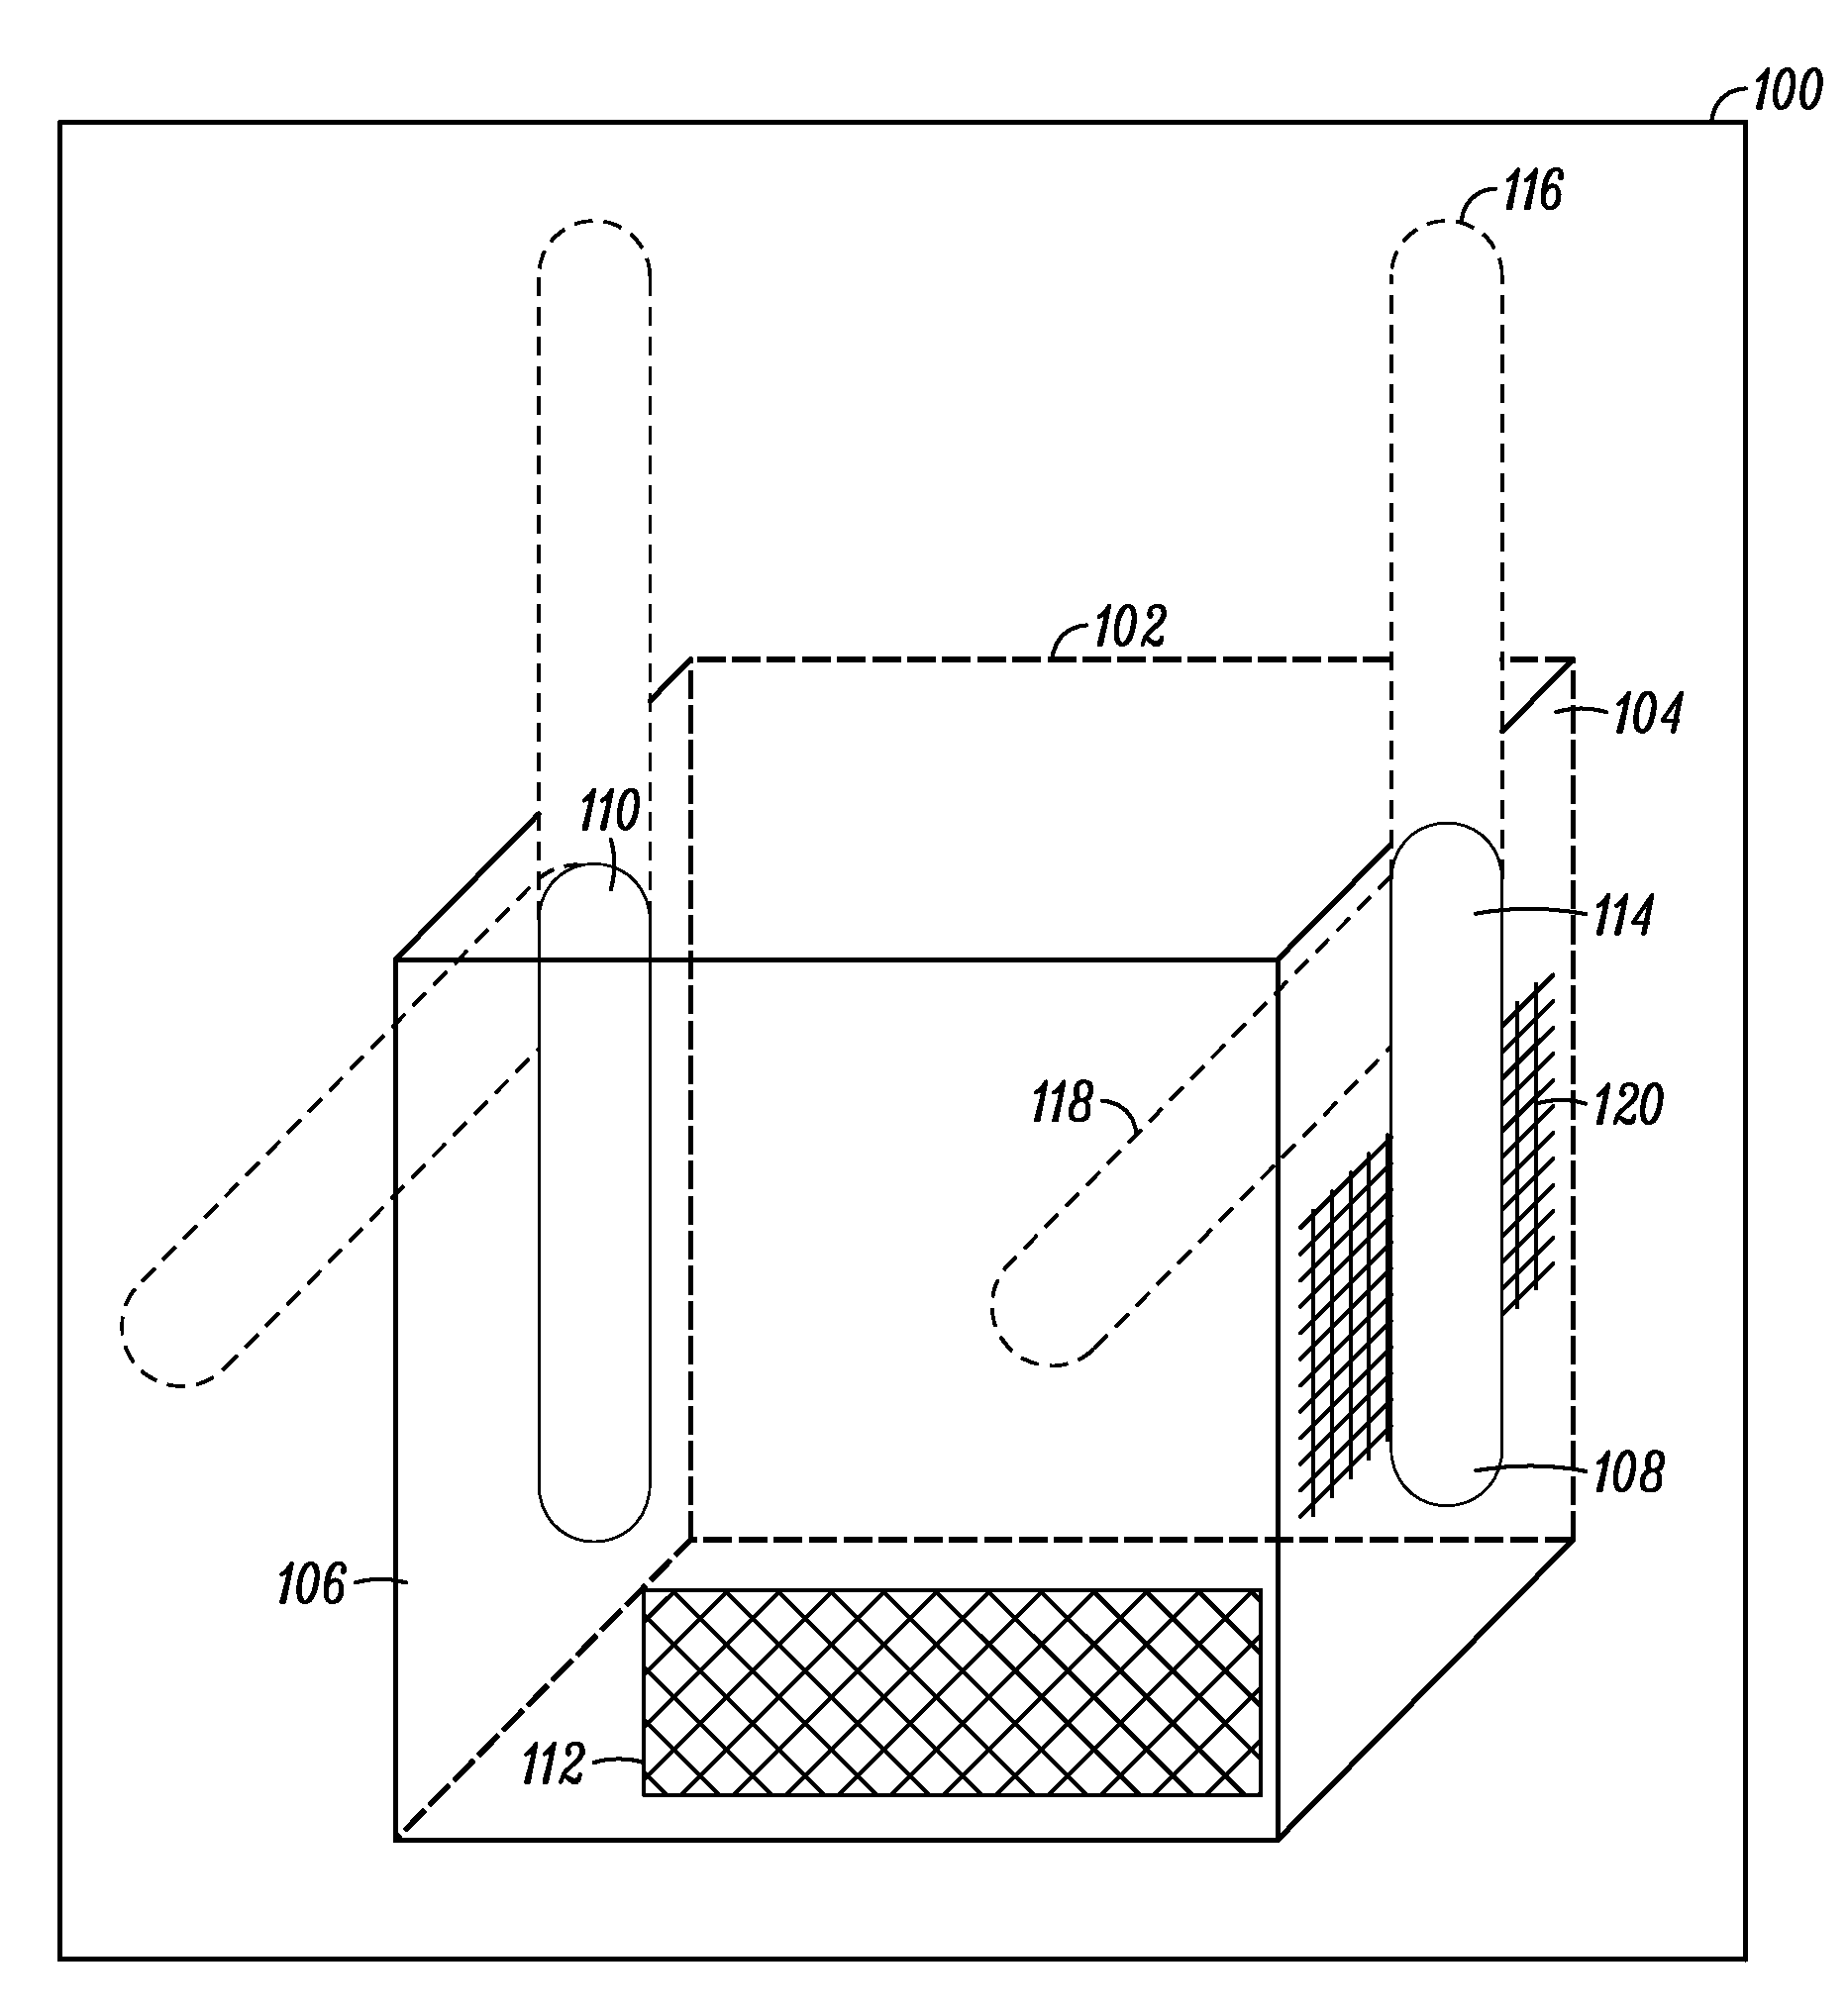 Antenna system and method for controlling an antenna pattern of a communication device